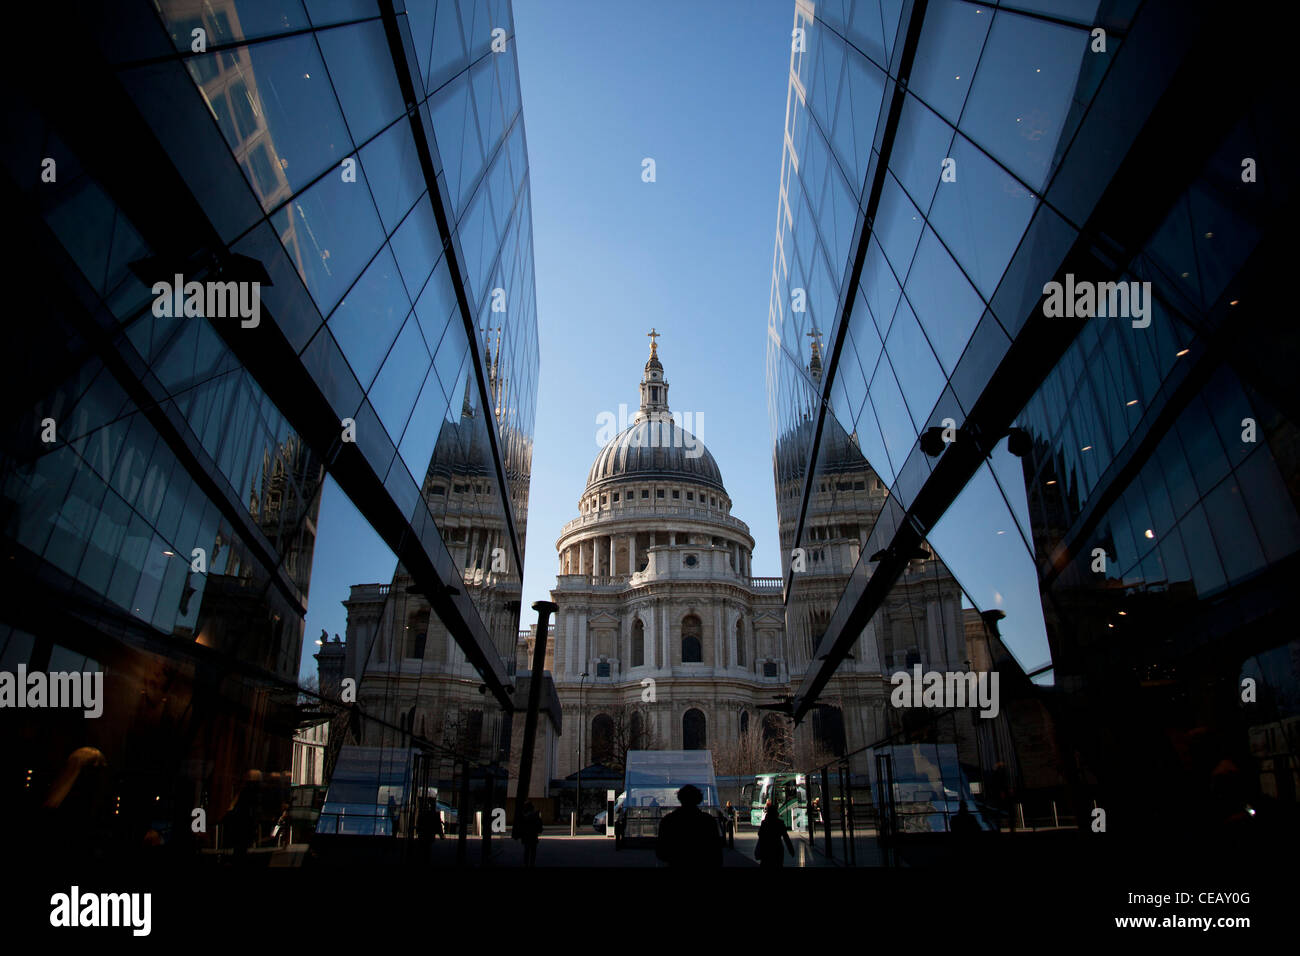 St Paul's Cathedral as seen from One New Change, a major office and retail development in the City of London. Stock Photo